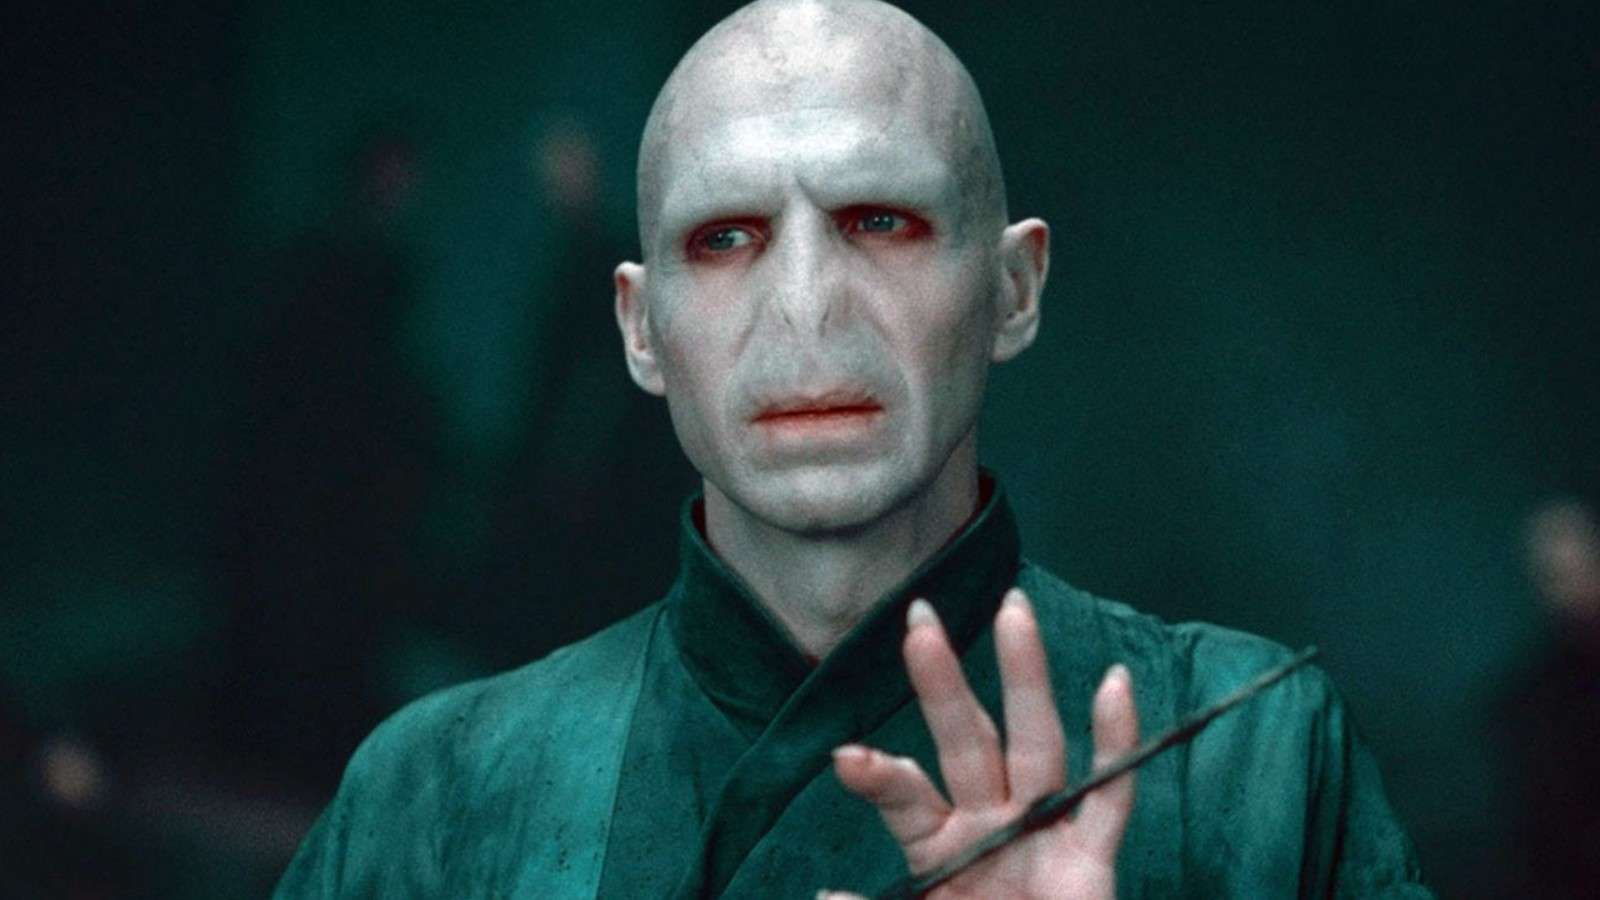 Ralph Fiennes - his nose missing - as Lord Voldemort in the Harry Potter films.